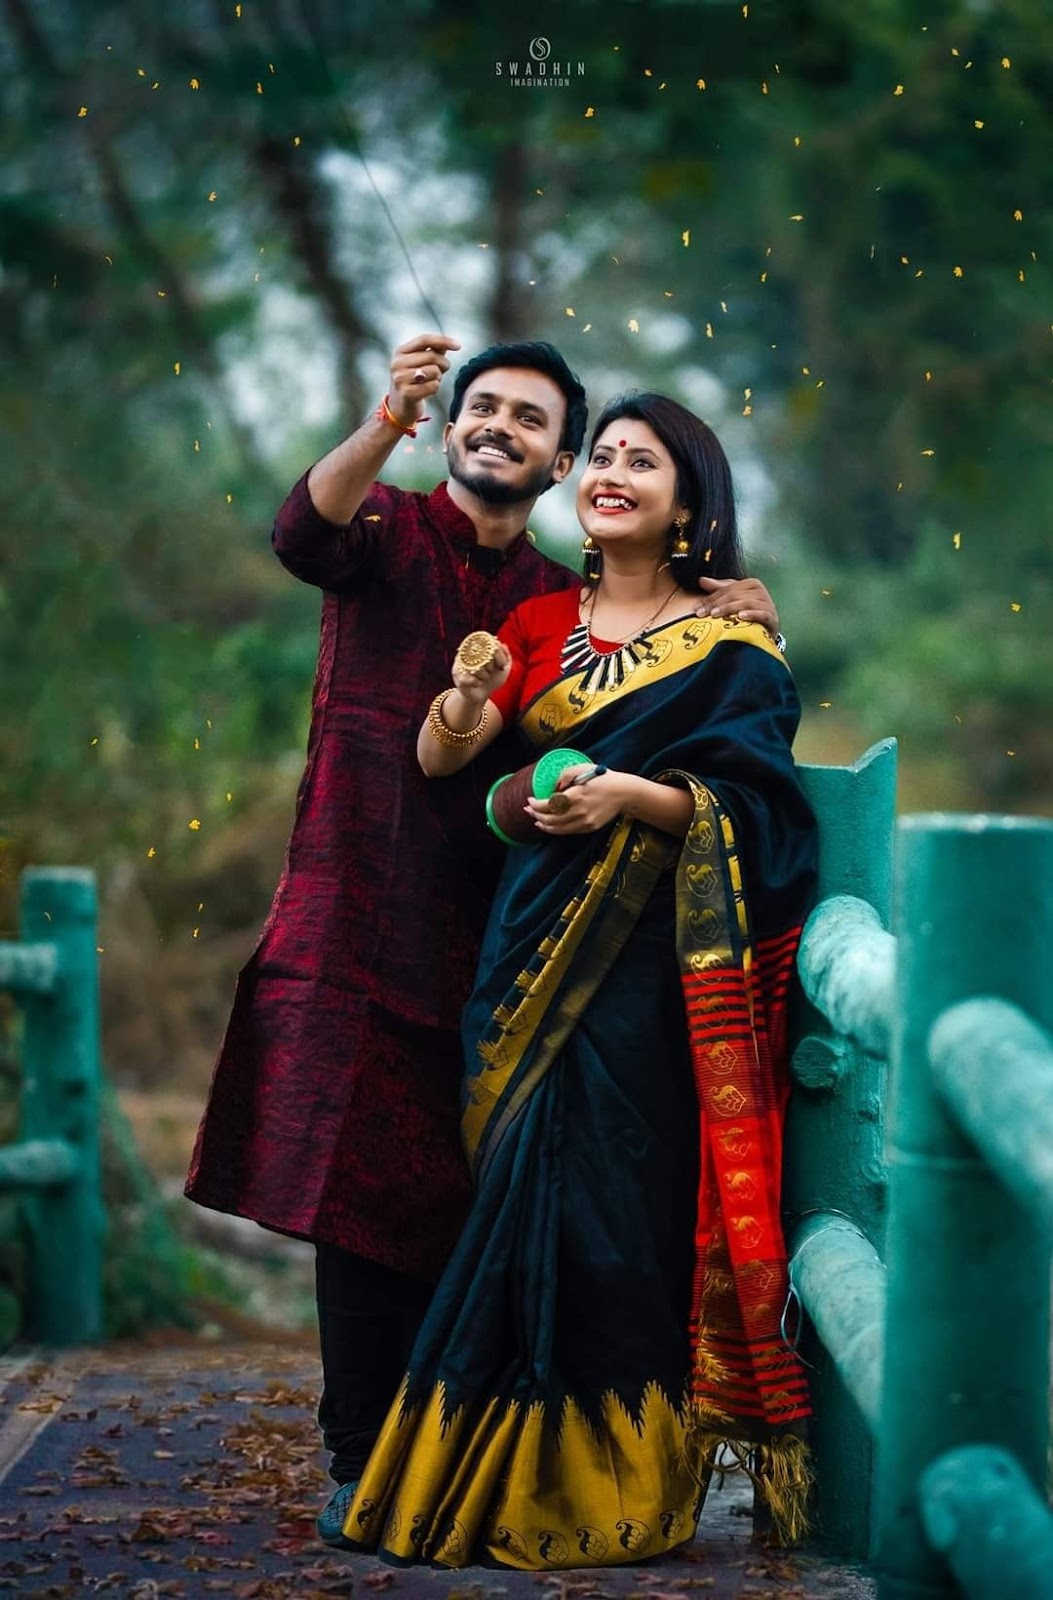 Photo of cute south indian couple shot with bride in red saree-thanhphatduhoc.com.vn